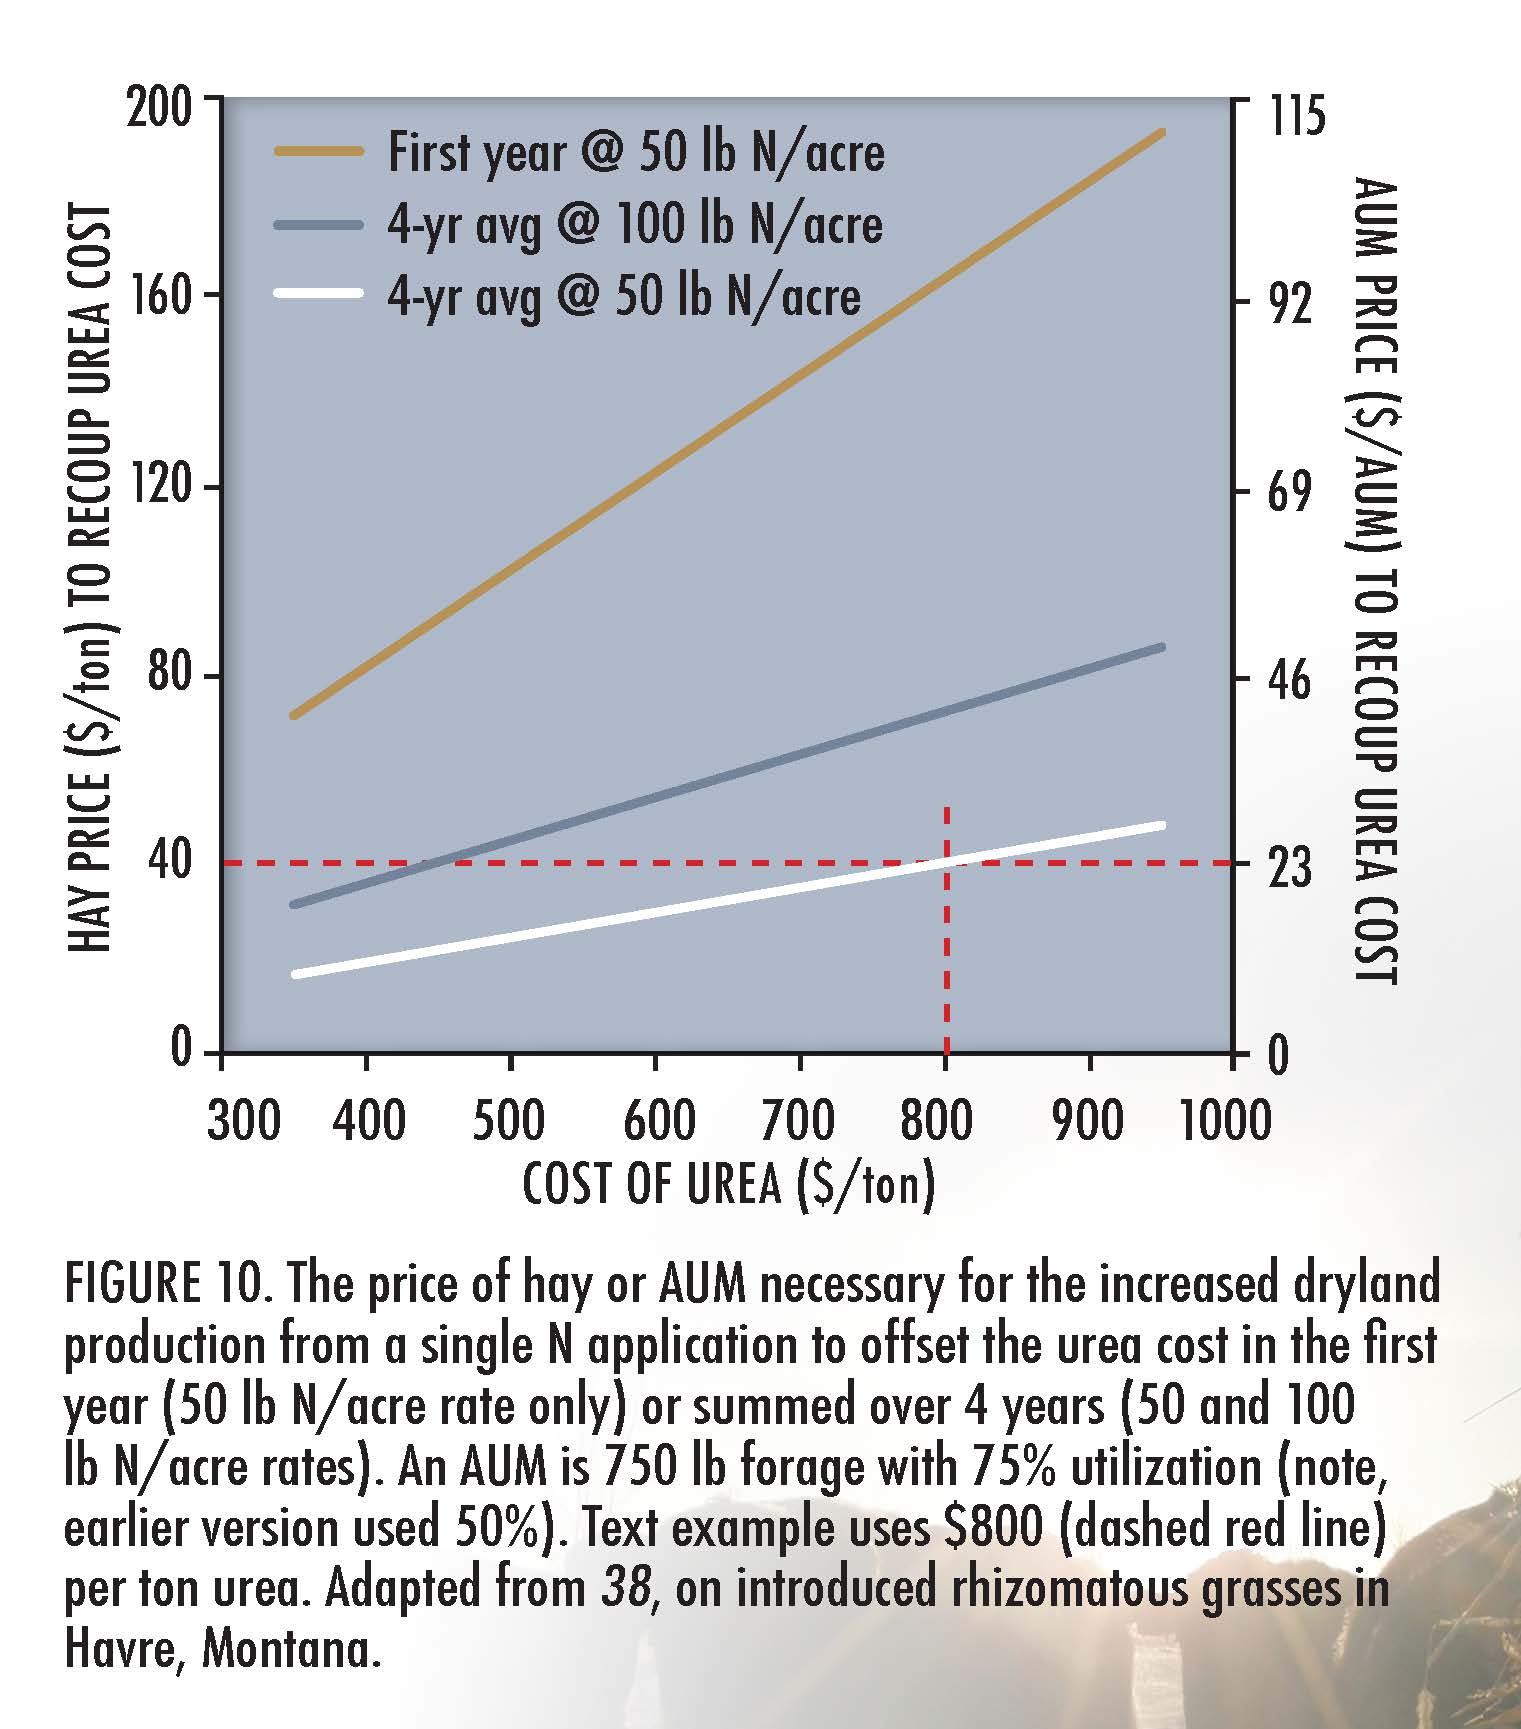 Figure 10. The price of hay or AUM necessary for the increased dryland production from a single N application to offset the urea cost in the first year (50 lb N/acre rate only) or summed over 4 years (50 and 100 lb N/acre rates). AN AUM is 750 lb forage with 75% utilization (note, earlier version used 50%). Text example uses $800 (dashed red line) per ton urea. Adapted from 38, on introduced rhizomatous grasses in Havre, Montana.